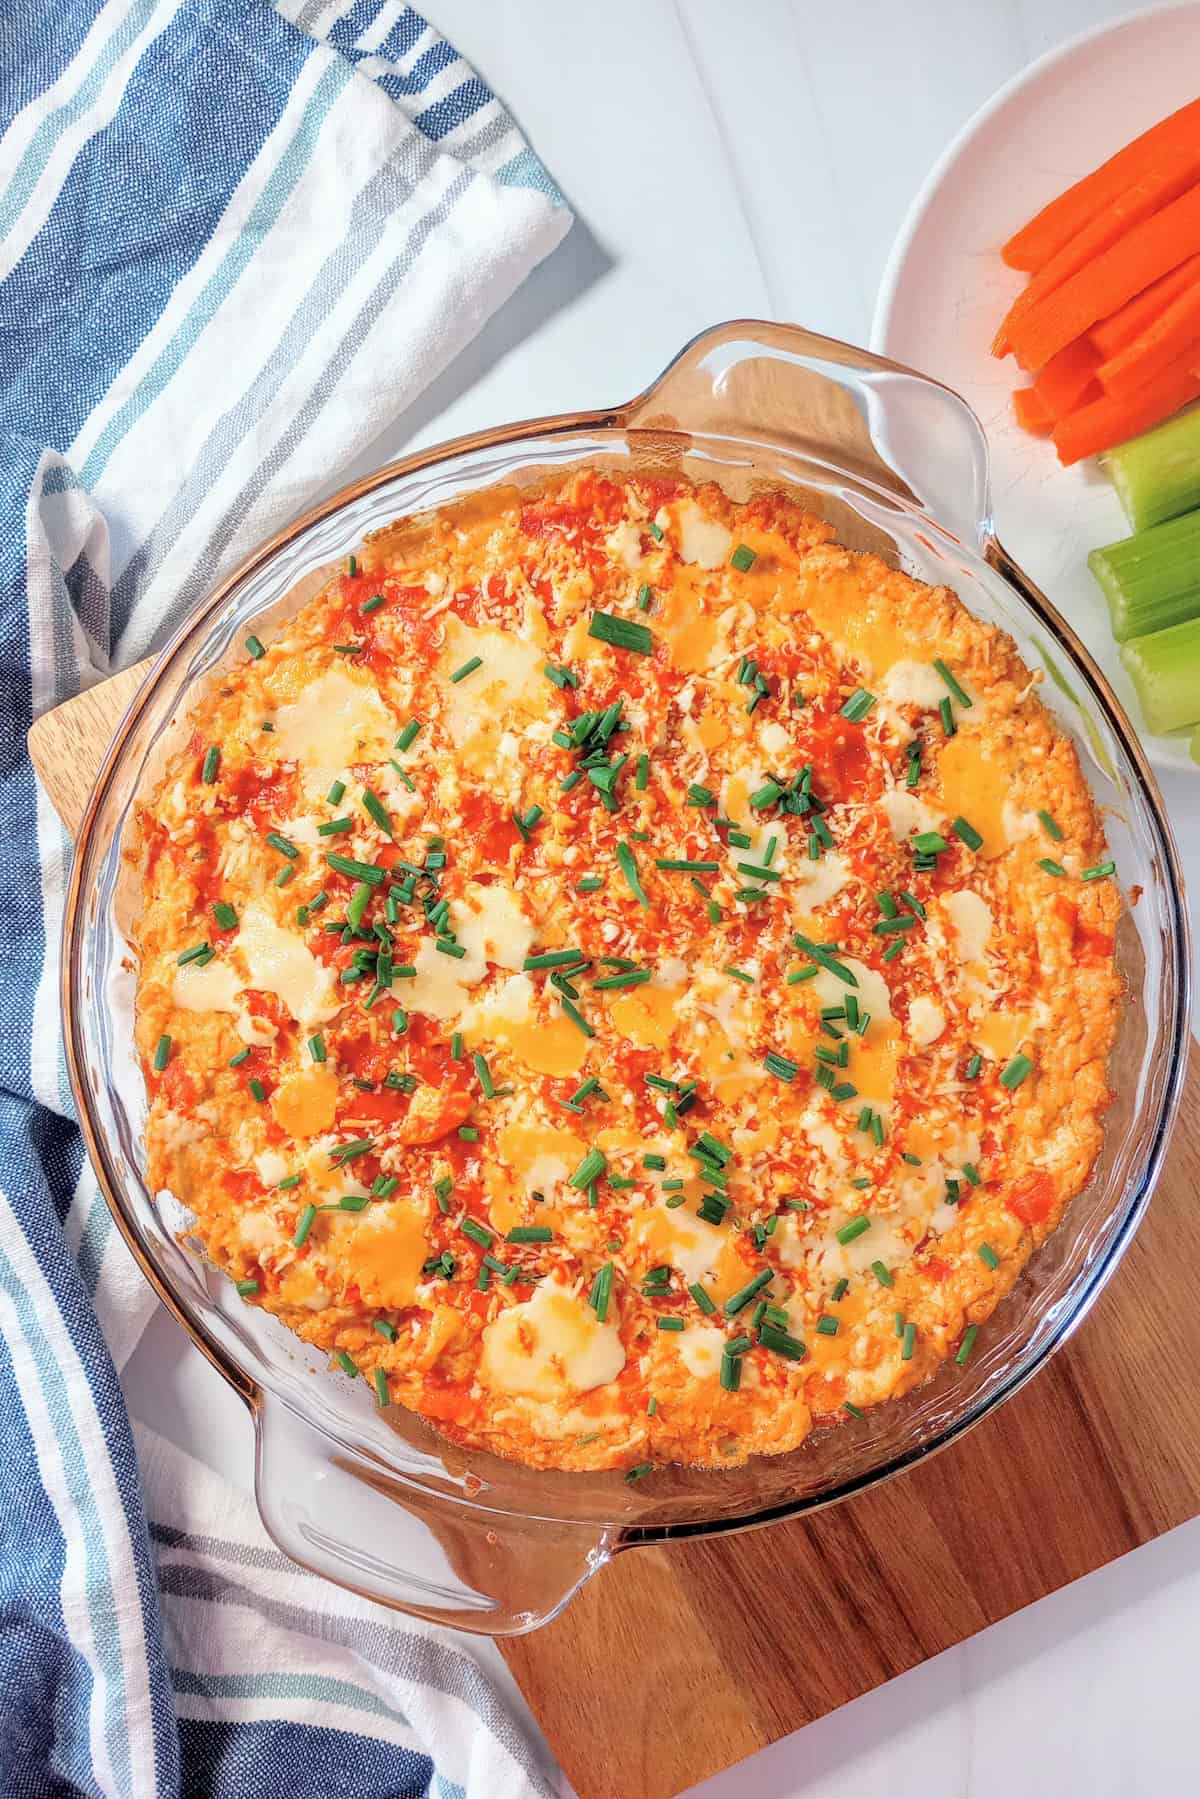 Super bowl buffalo chicken dip fresh out of the oven topped with chives. Carrot and celery sticks are arranged on a white plate next to dip.